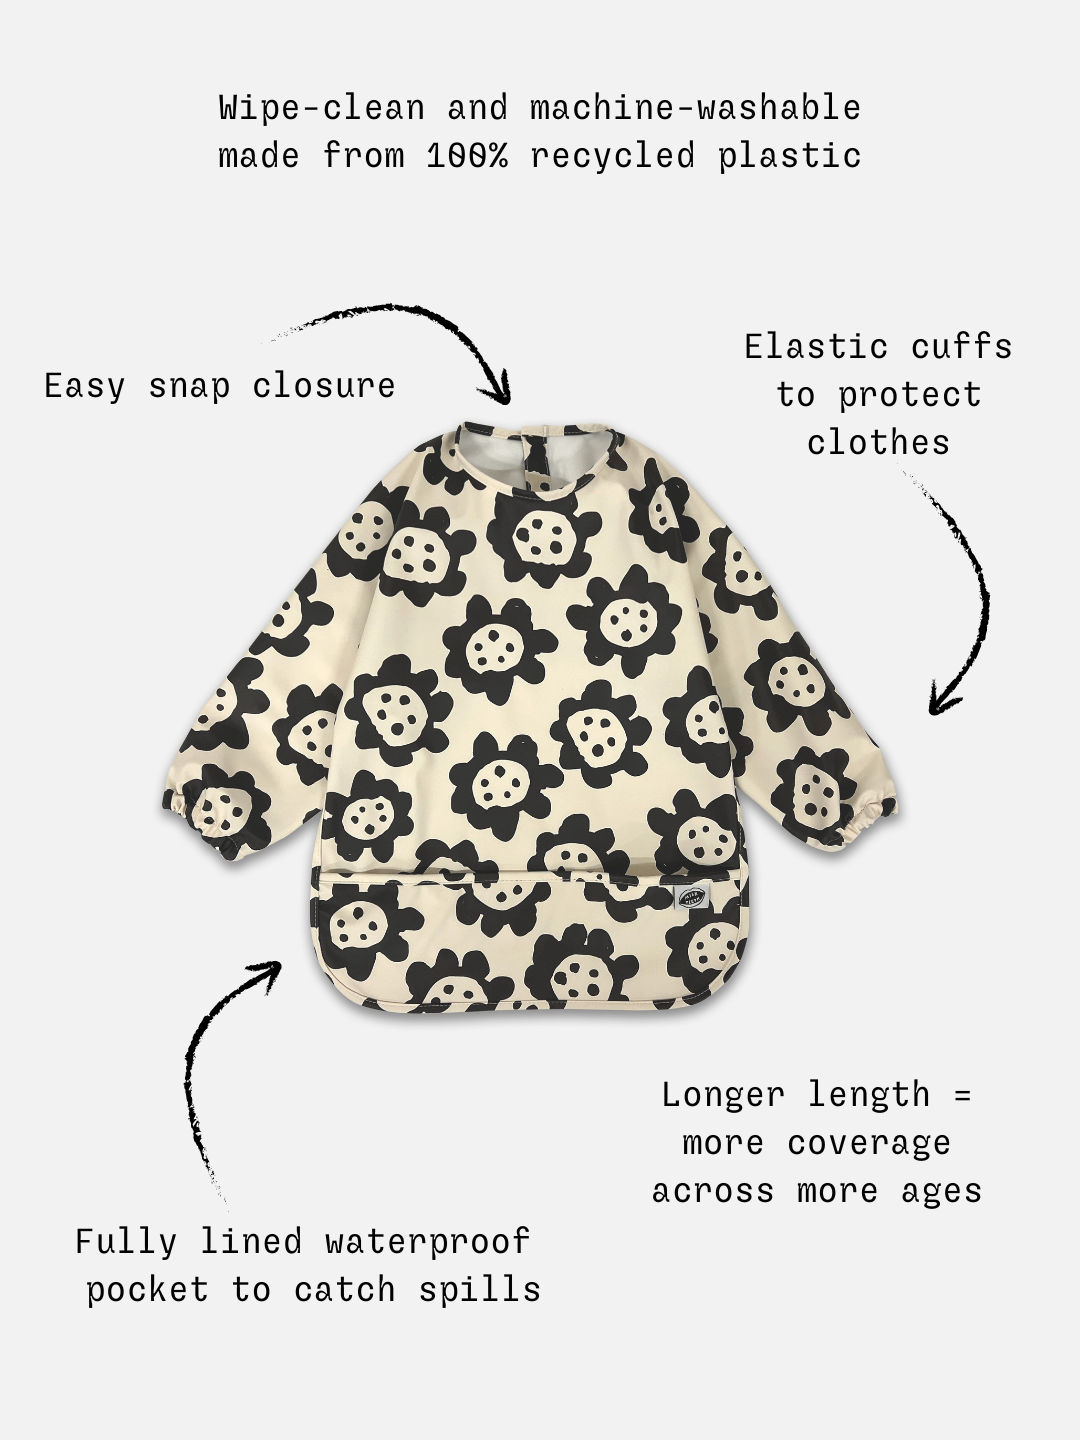 Detailed information of the long sleeve cream colored bib with black sunflowers and a front pocket.